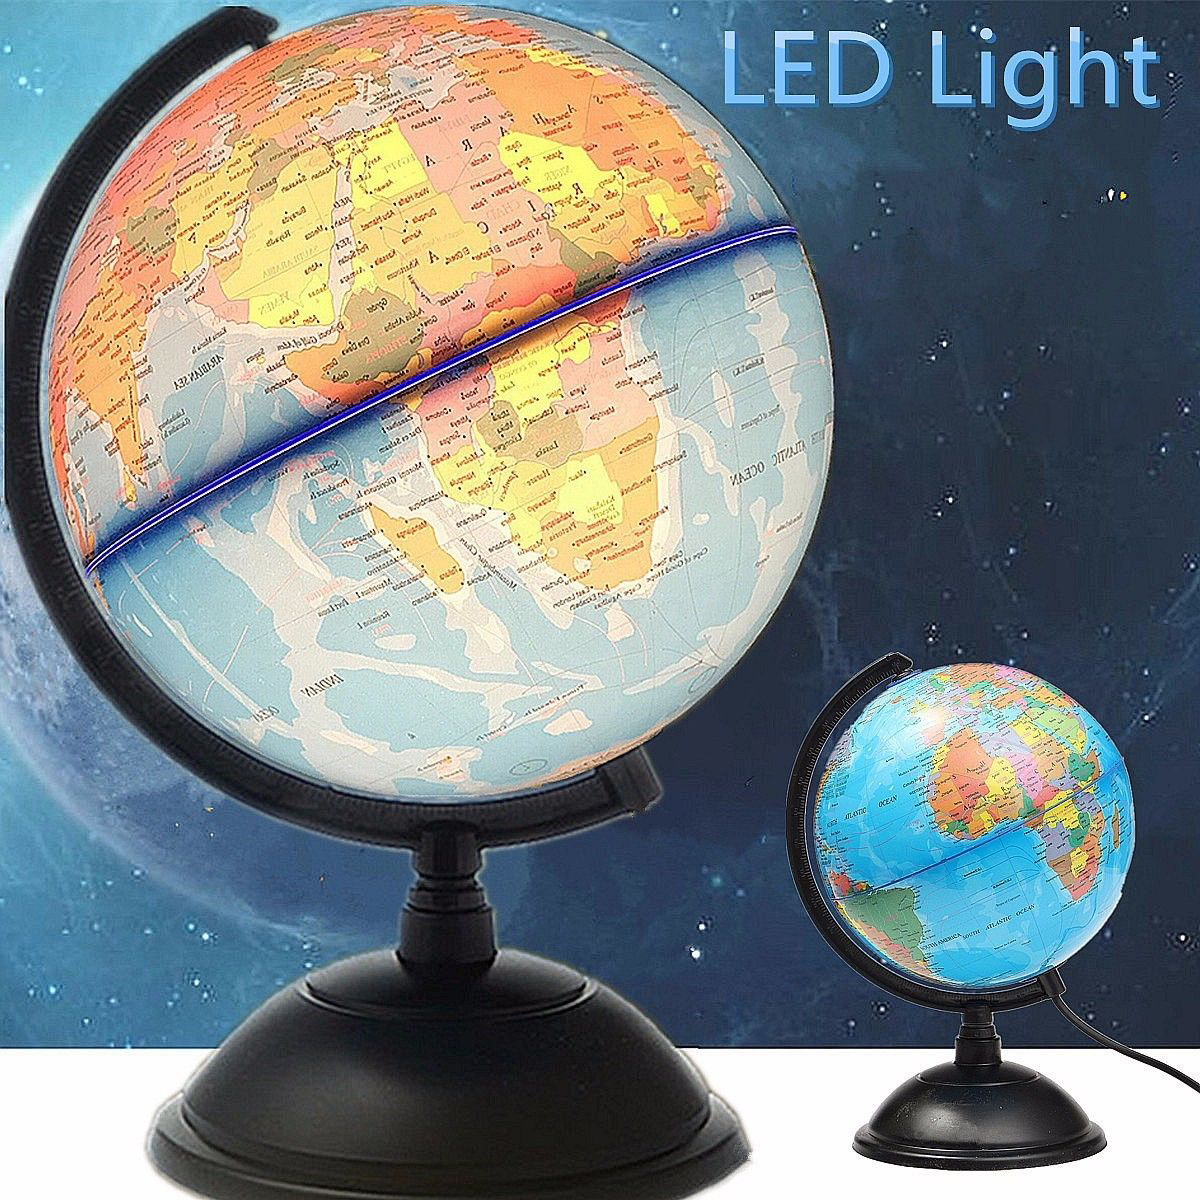 World-Earth-Globe-Atlas-Map-Geography-Education-Gift-w-Rotating-Stand-LED-light-1256065-1